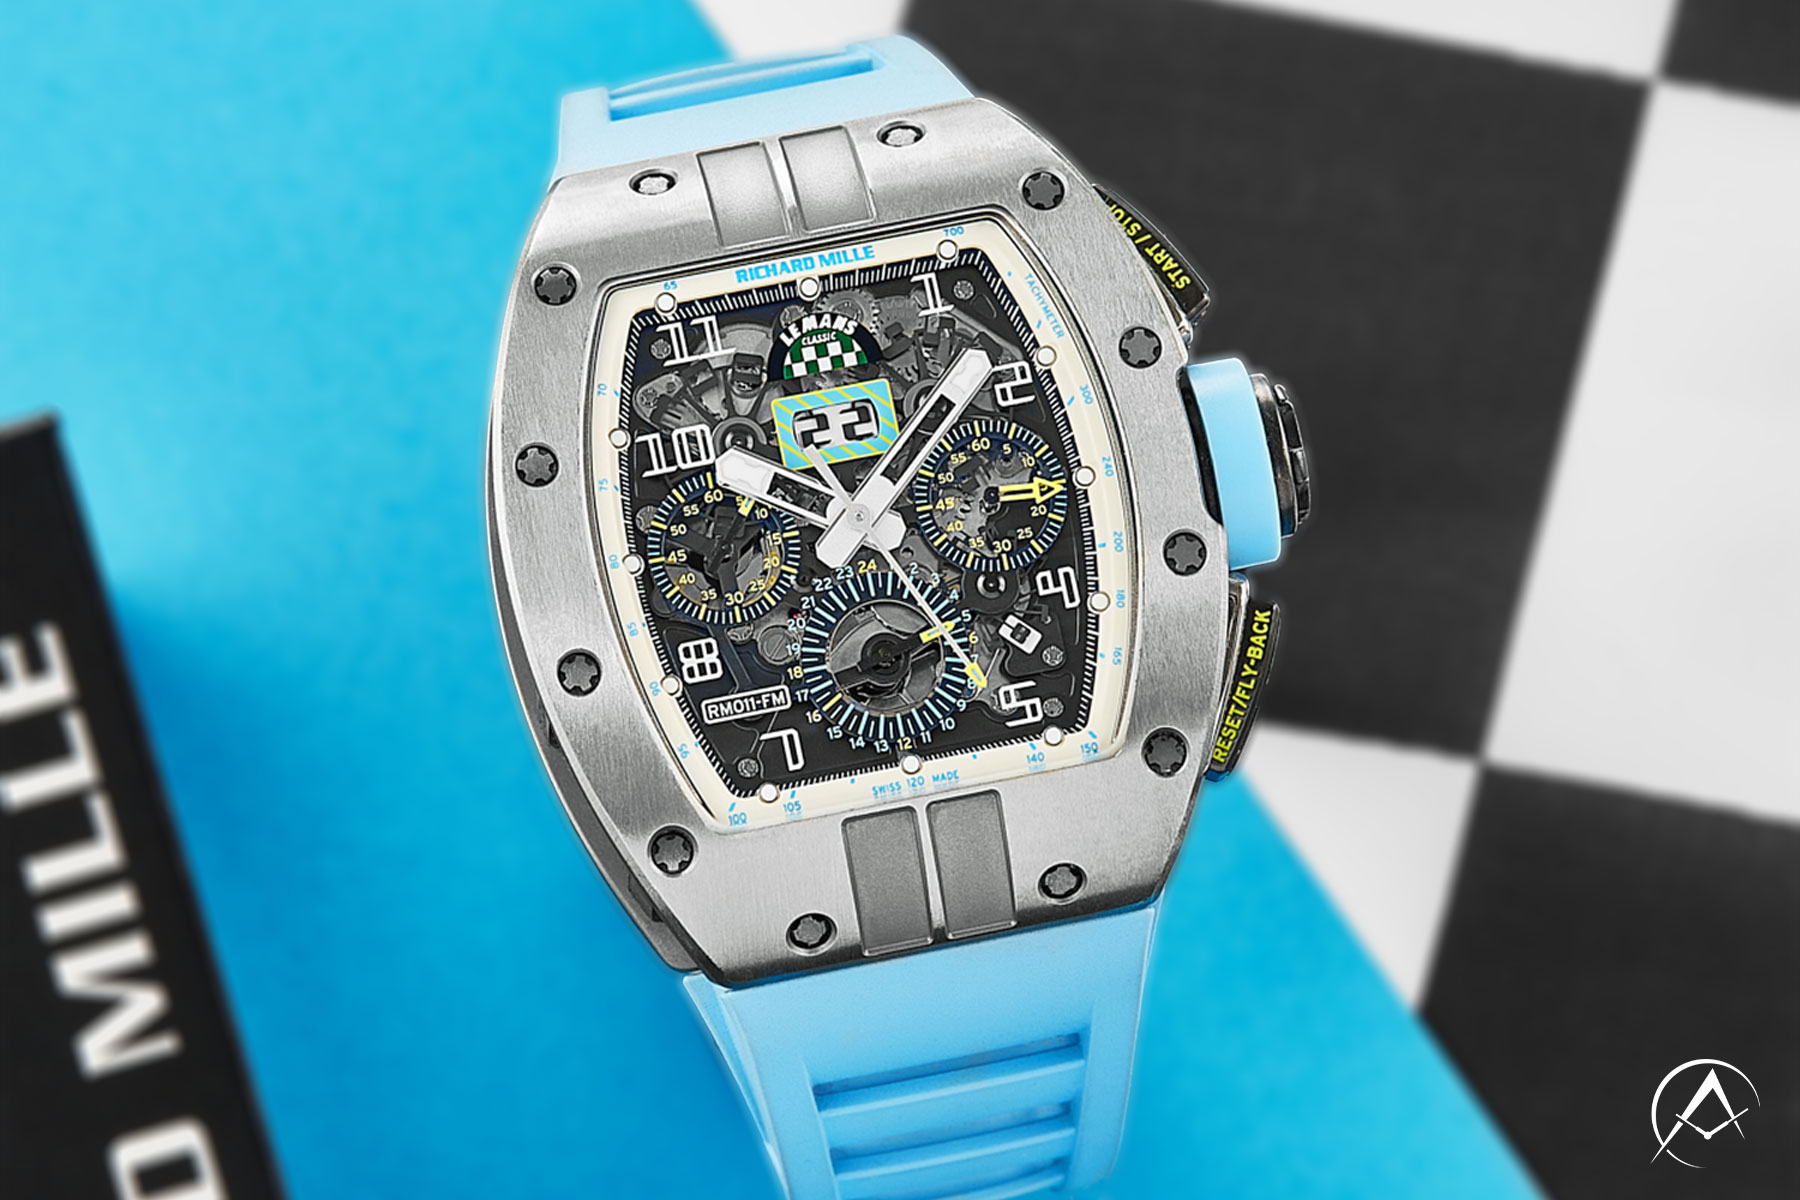 Richard Mille Timepiece with Openworked Dial and Light Blue Rubber Strap on a Light Blue, Black, and White Background.